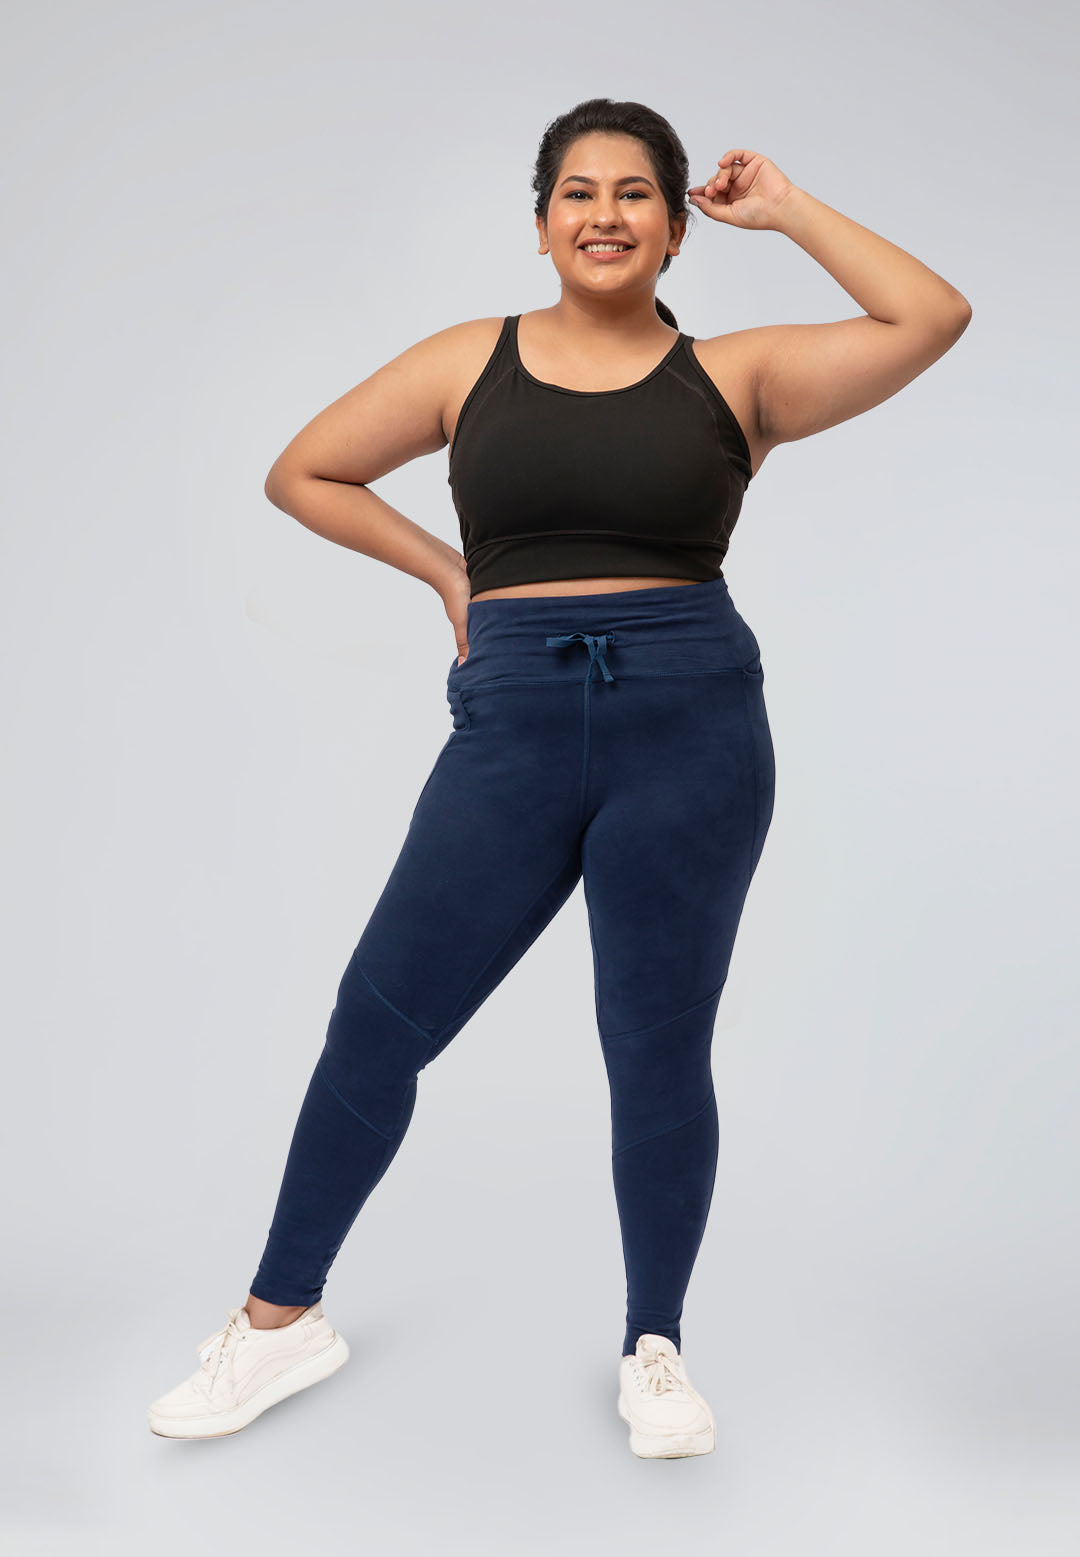 Cotton Royal Blue and Blue Color Leggings Combo @ 31% OFF Rs 407.00 Only  FREE Shipping + Extra Discount - Stylish legging, Buy Stylish legging Online,  simple legging, Combo Deal, Buy Combo